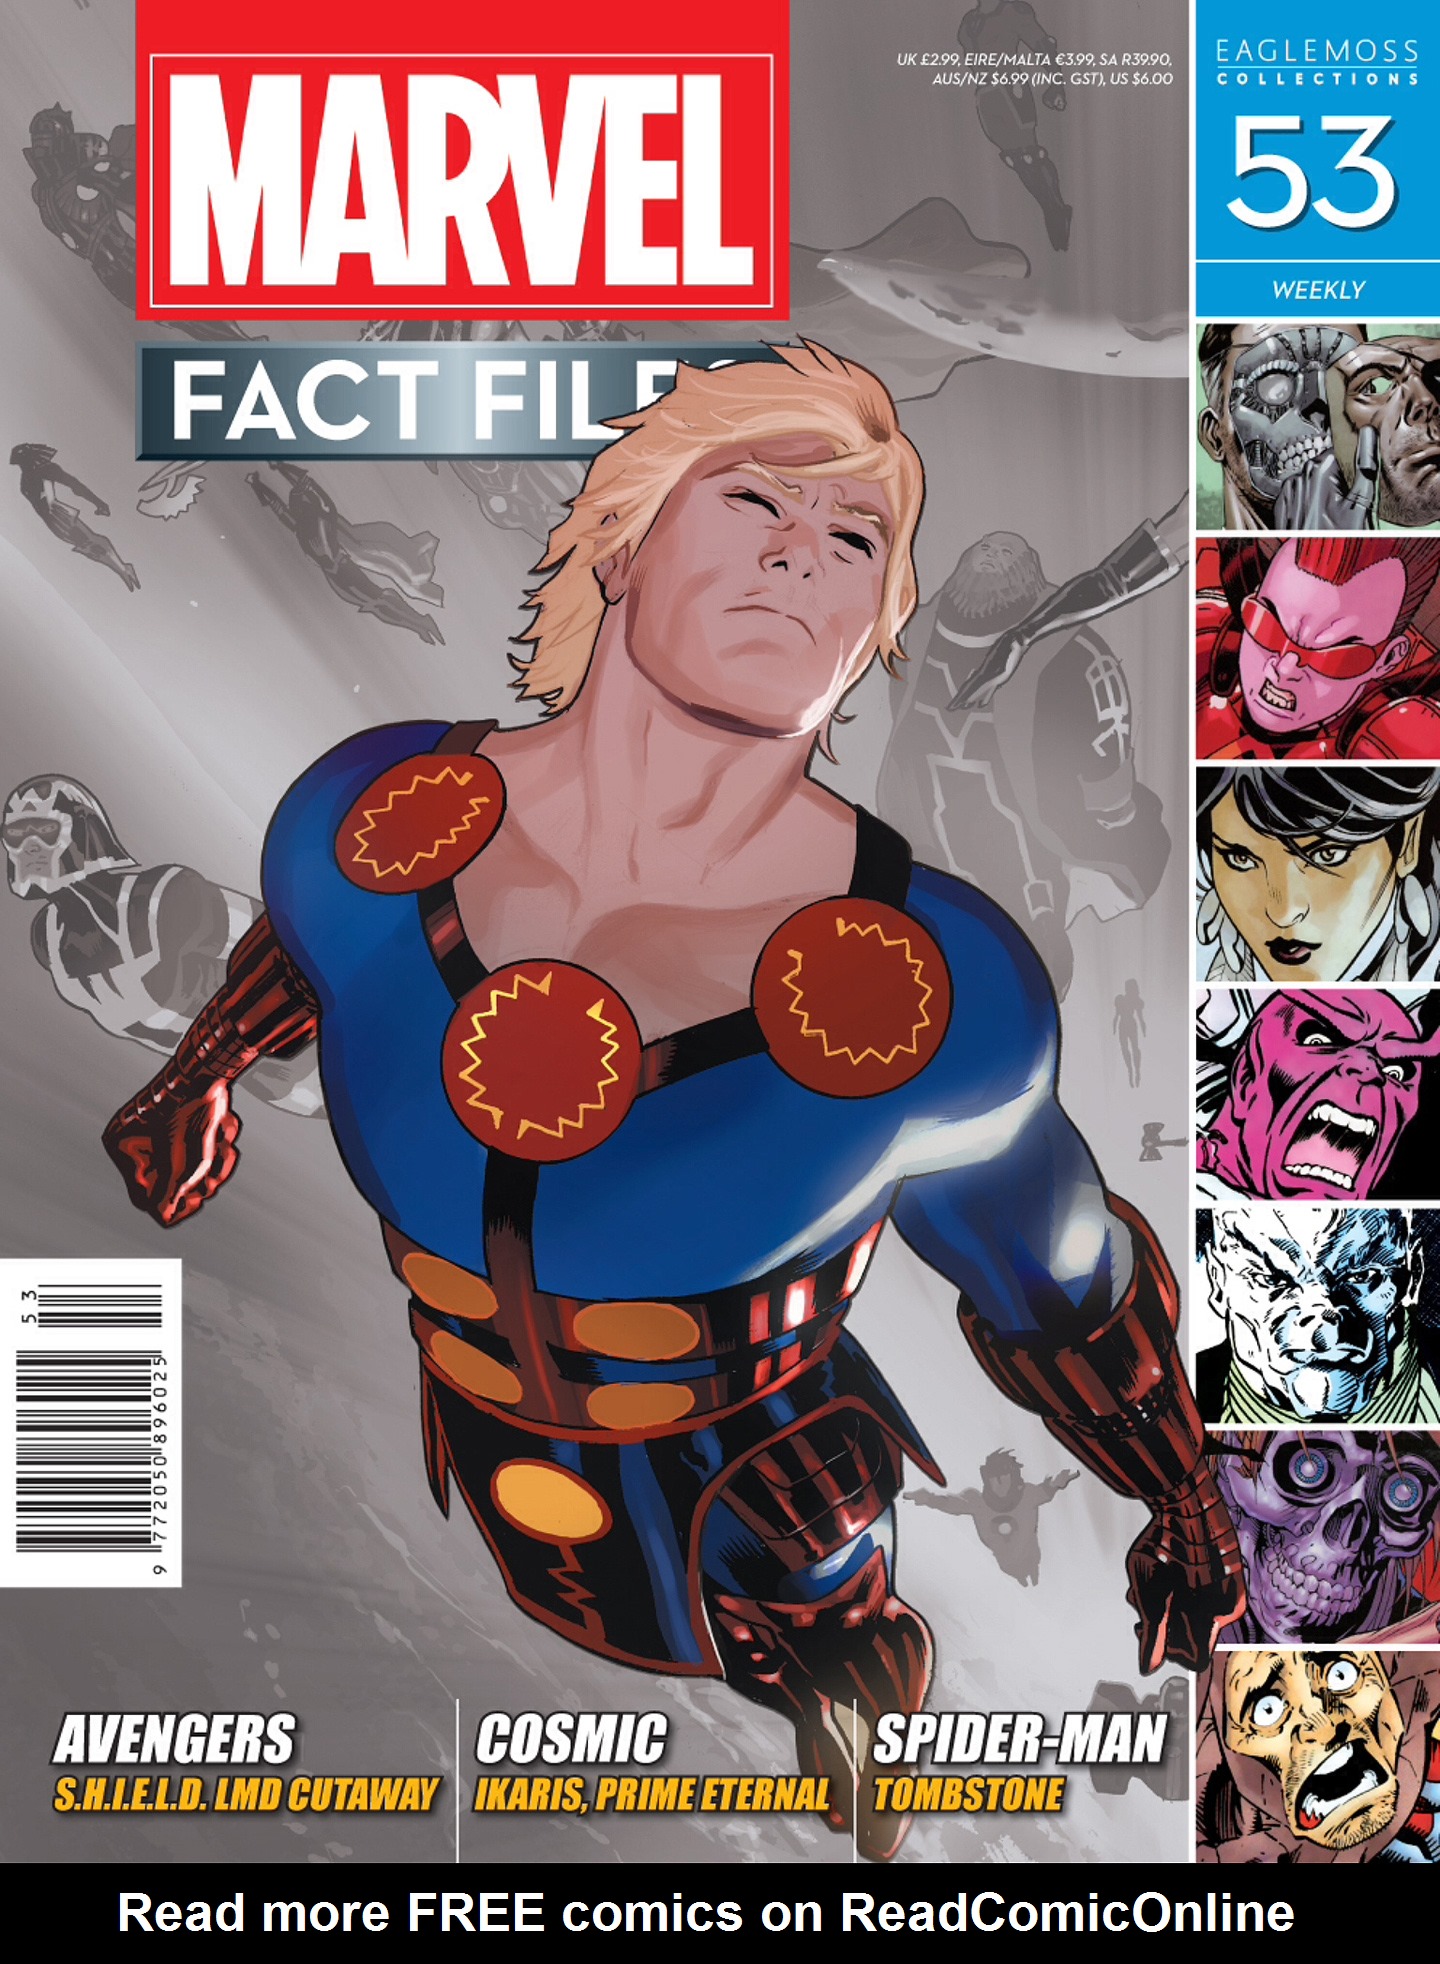 Read online Marvel Fact Files comic -  Issue #53 - 2